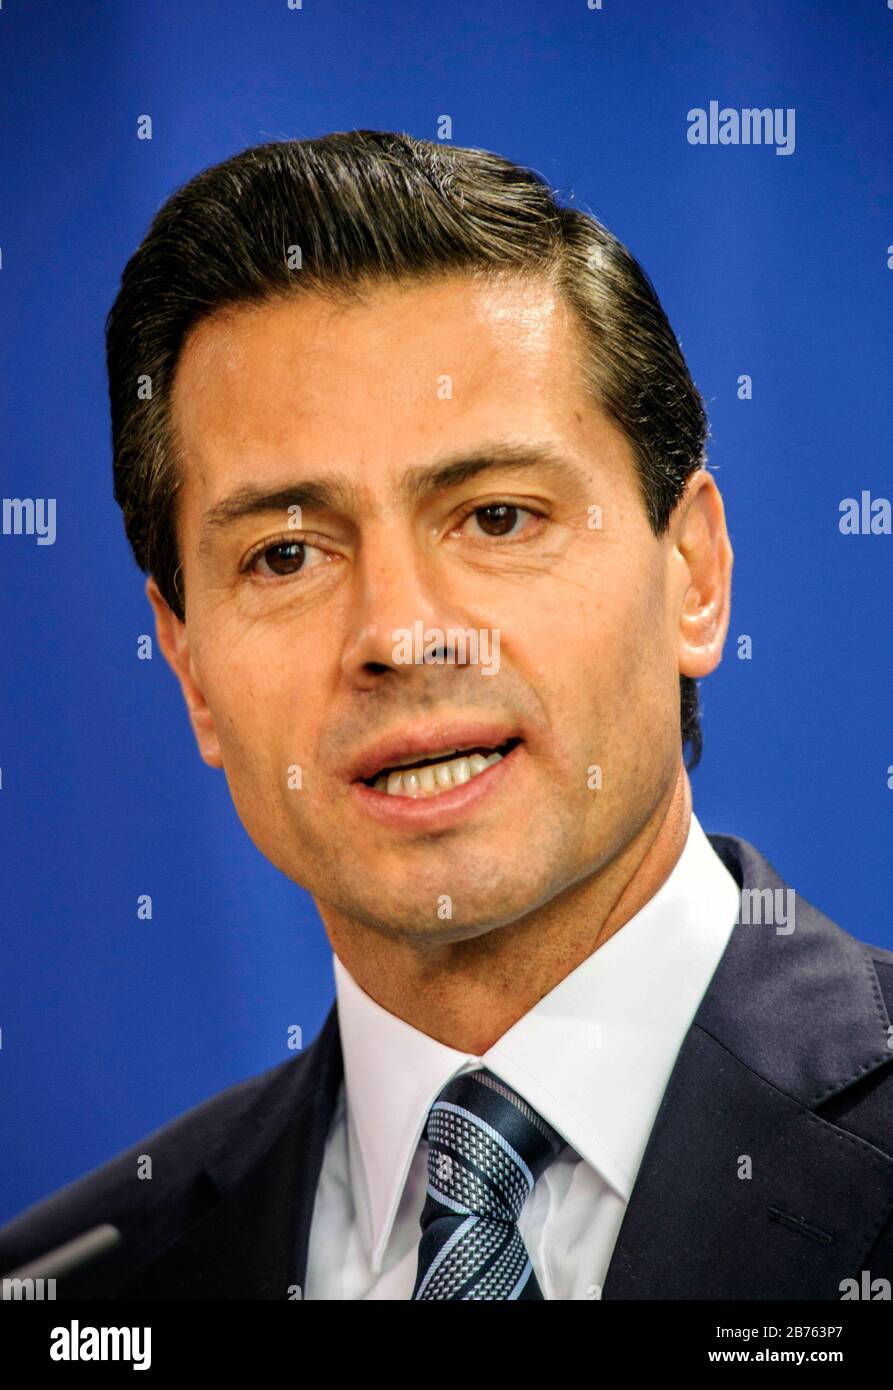 Germany, Berlin, 12.04.2016. Visit of the President of the United States of Mexico to the Federal Chancellery on 12.04.2016 in Berlin. Enrique Pena Nieto, Enrique Peña Nieto, President of the United States of Mexico [automated translation] Stock Photo